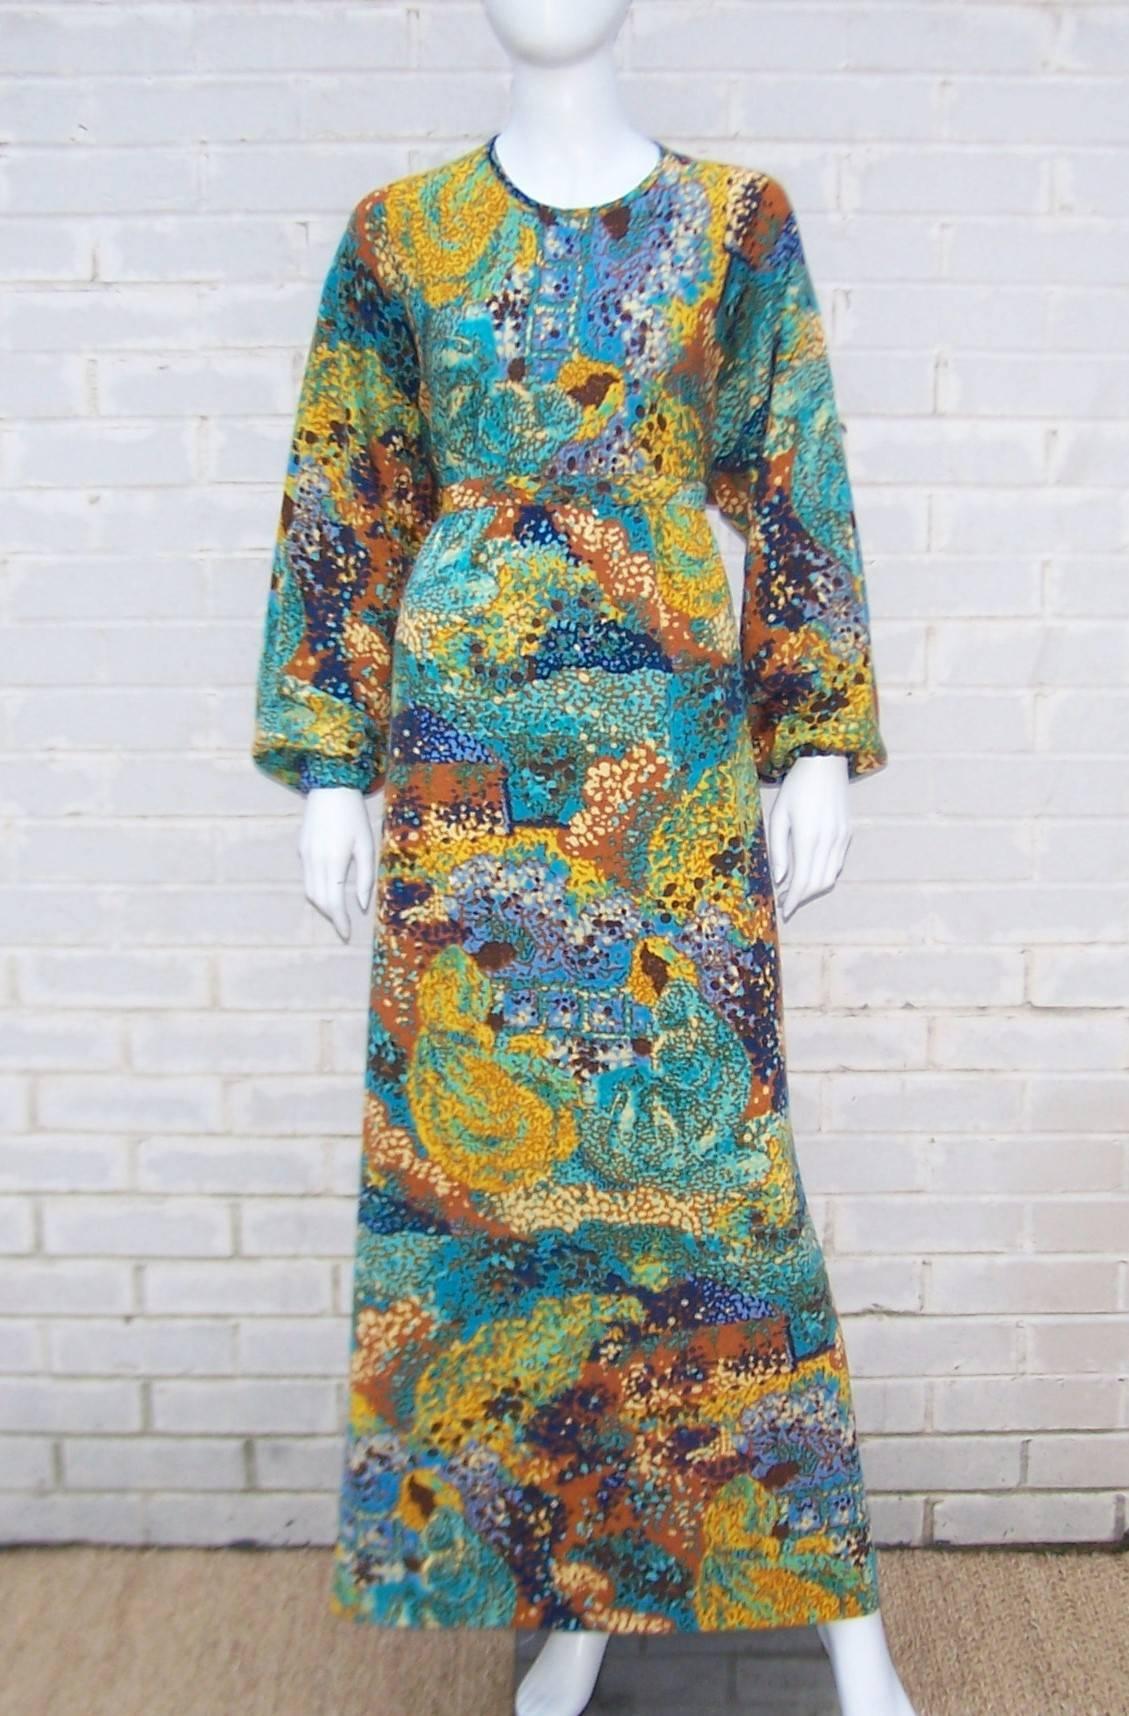 Goldworm was a New York based company that produced stylish knitwear incorporating Italian fabrics and designs.  This 1970's maxi dress is a vibrant abstract impressionist print with a range of colors including aqua, greens, blues, browns and